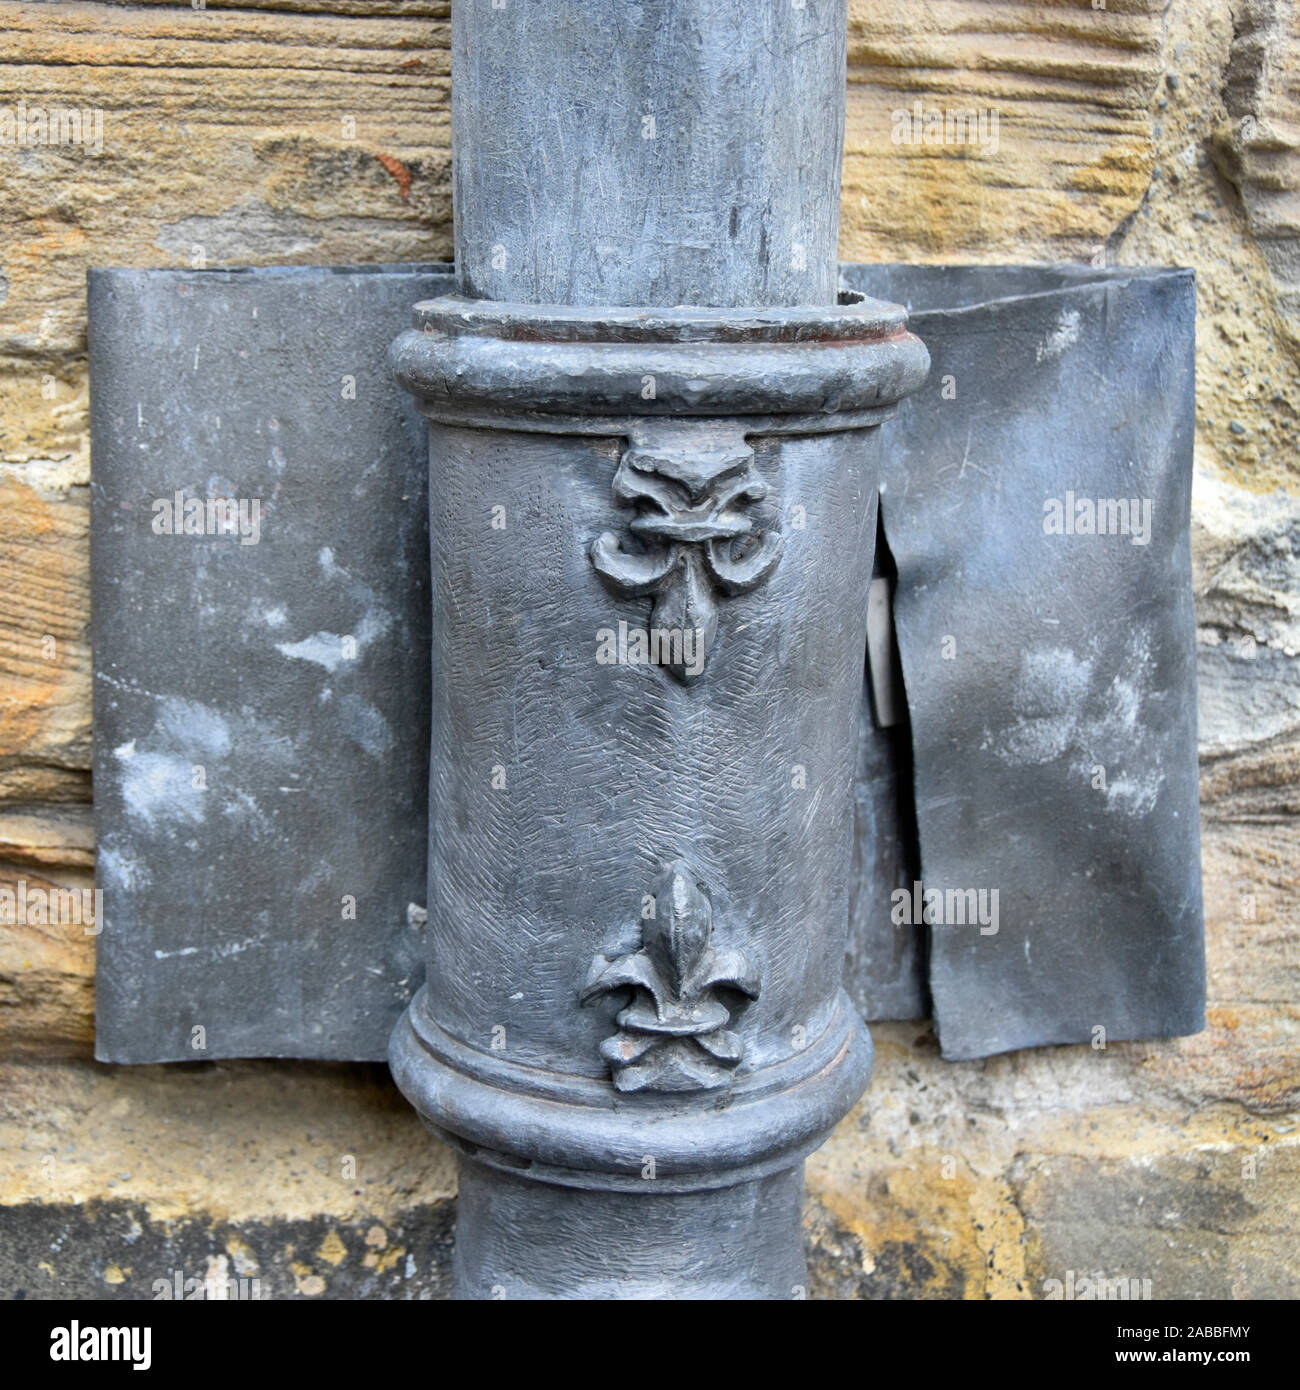 Close up 4” lead rainwater downpipe & fleur de lis ornamental design on plumbing straight joint held on wall with wide lead strap Durham cathedral UK Stock Photo